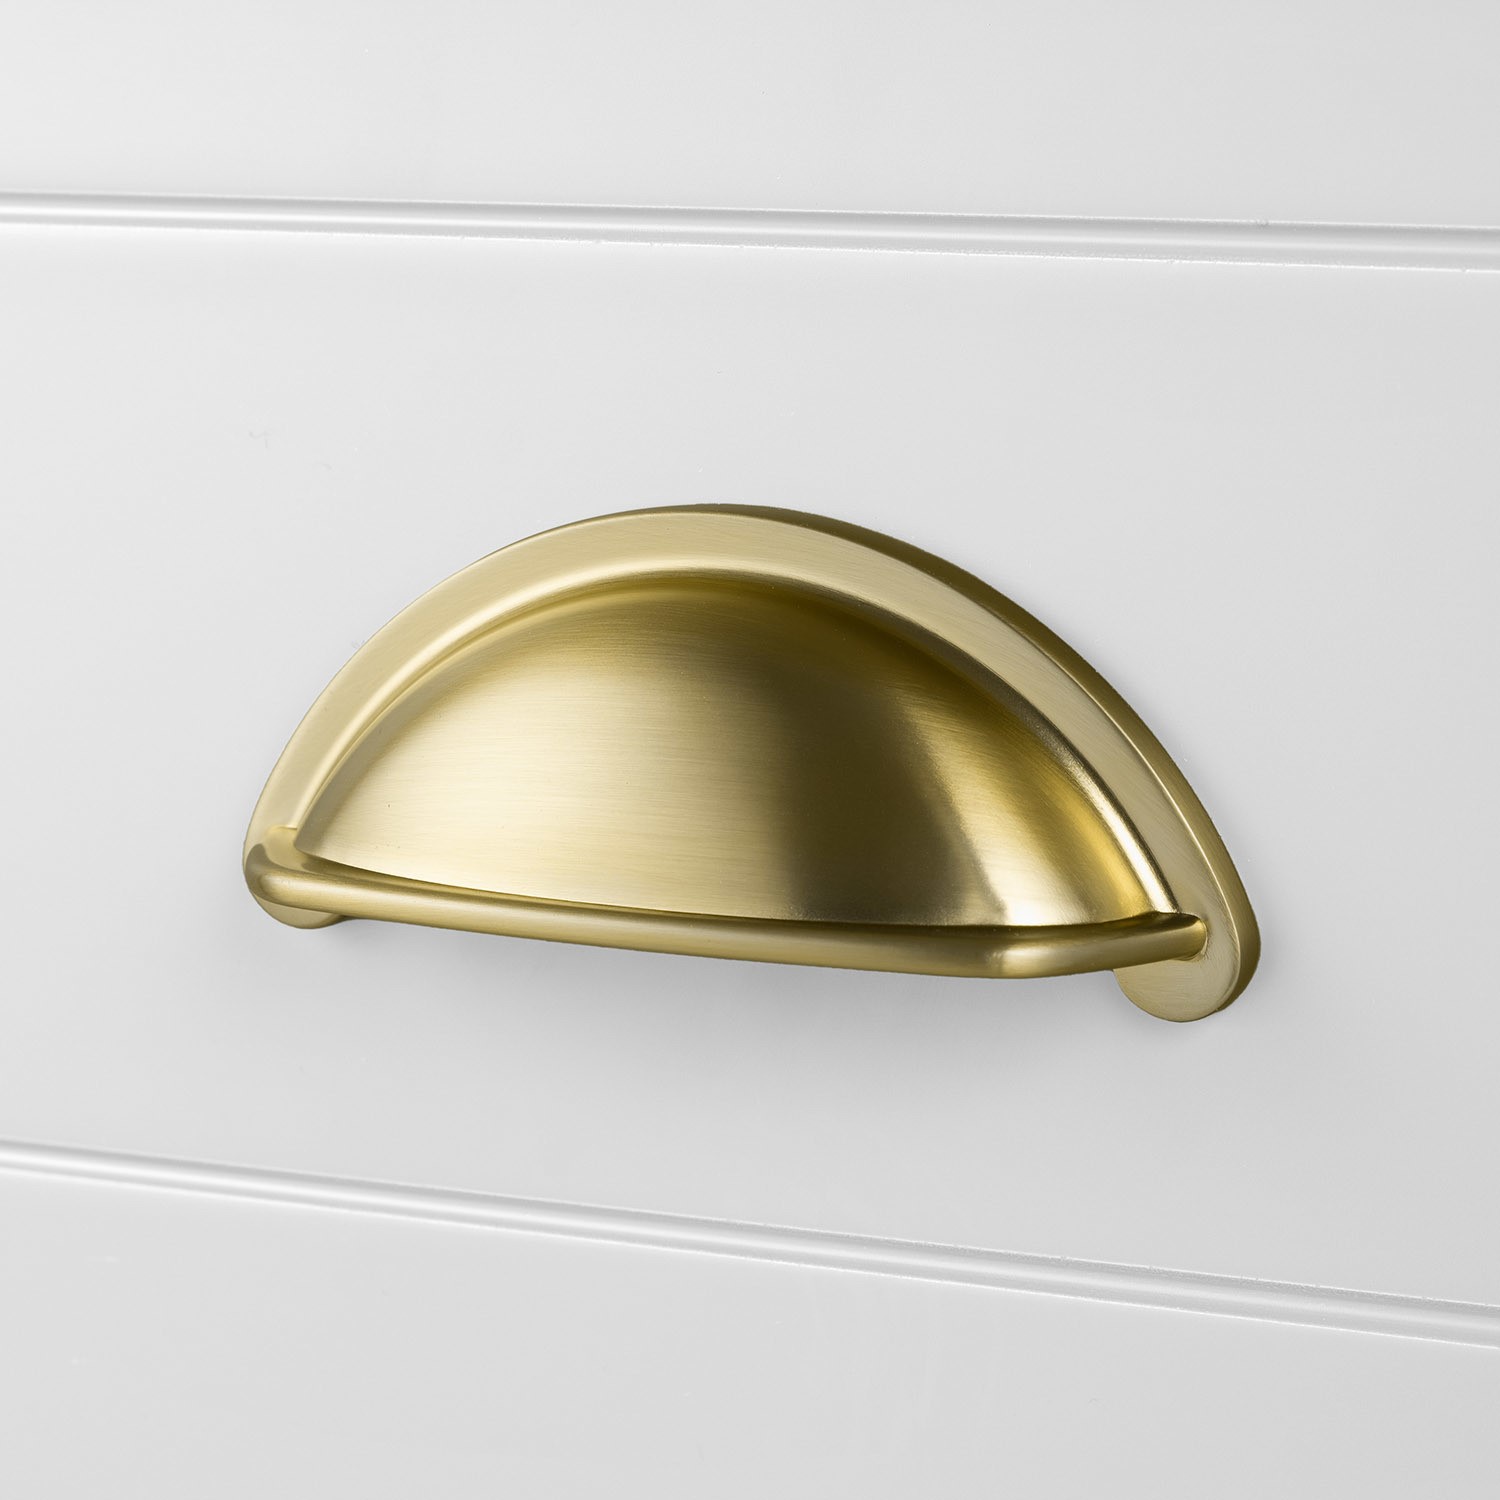 2 Brushed Brass Cup Handles - Kentmere - Better Bathrooms